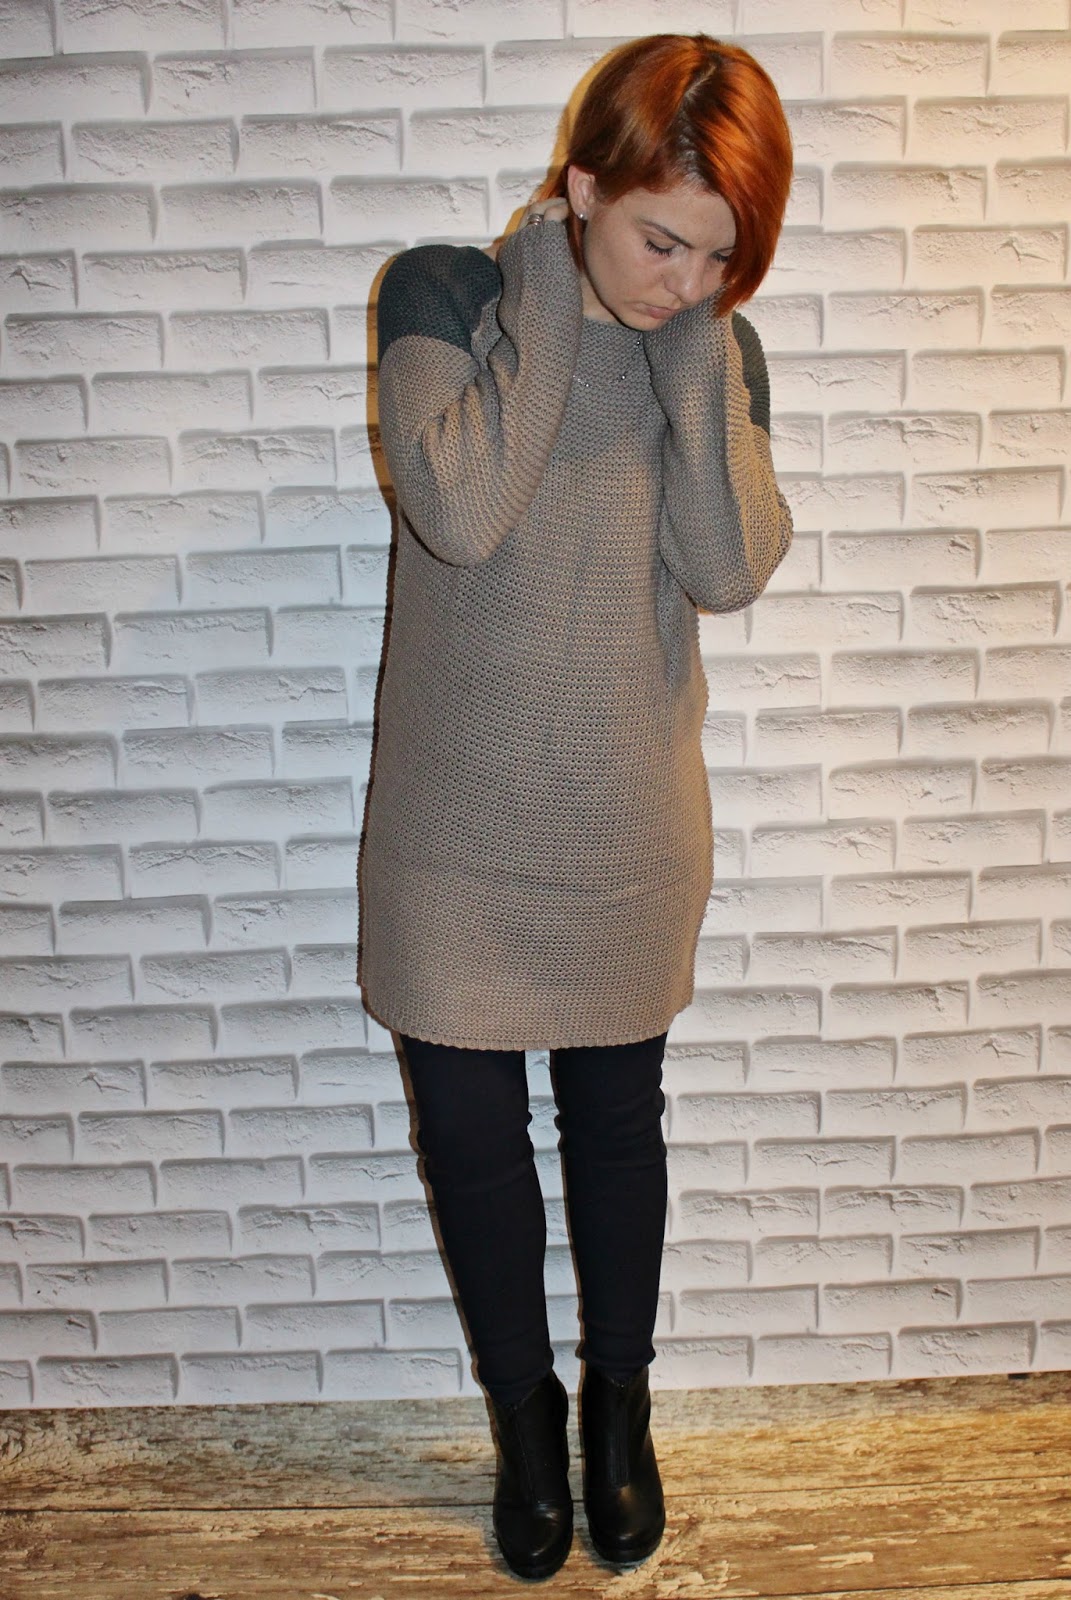 http://www.rosewholesale.com/cheapest/street-snap-color-block-sweater-1377279.html?lkid=352248